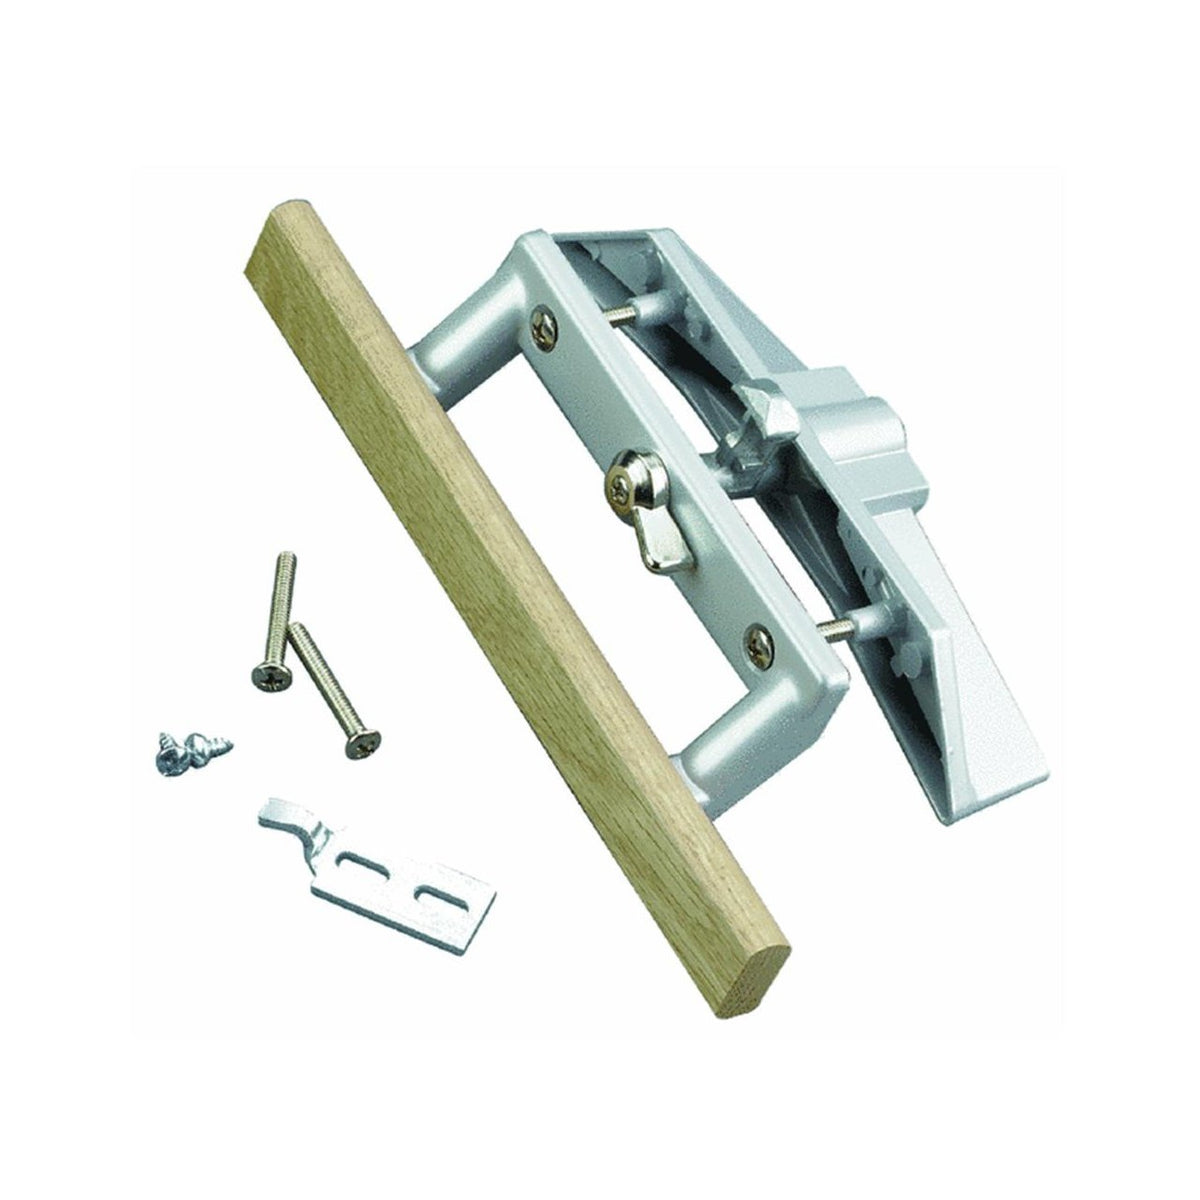 buy patio door hardware at cheap rate in bulk. wholesale & retail builders hardware supplies store. home décor ideas, maintenance, repair replacement parts